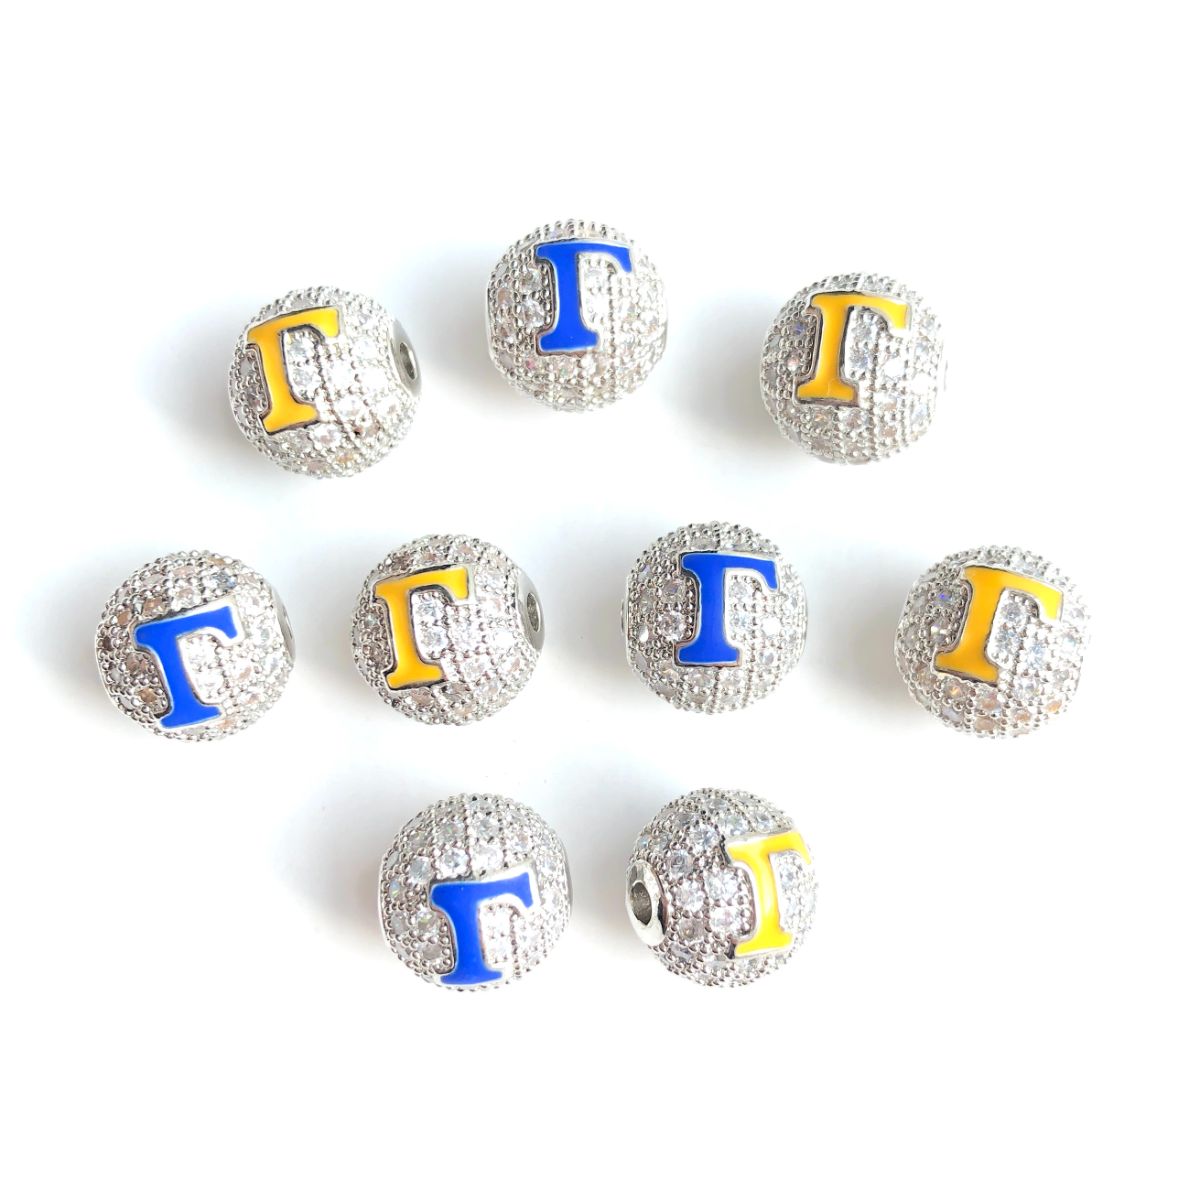 12pcs/lot 10mm Blue Yellow Enamel CZ Paved Greek Letter "Σ", "Γ", "Ρ" Ball Spacers Beads 12 Silver Γ CZ Paved Spacers 10mm Beads Ball Beads Greek Letters New Spacers Arrivals Charms Beads Beyond